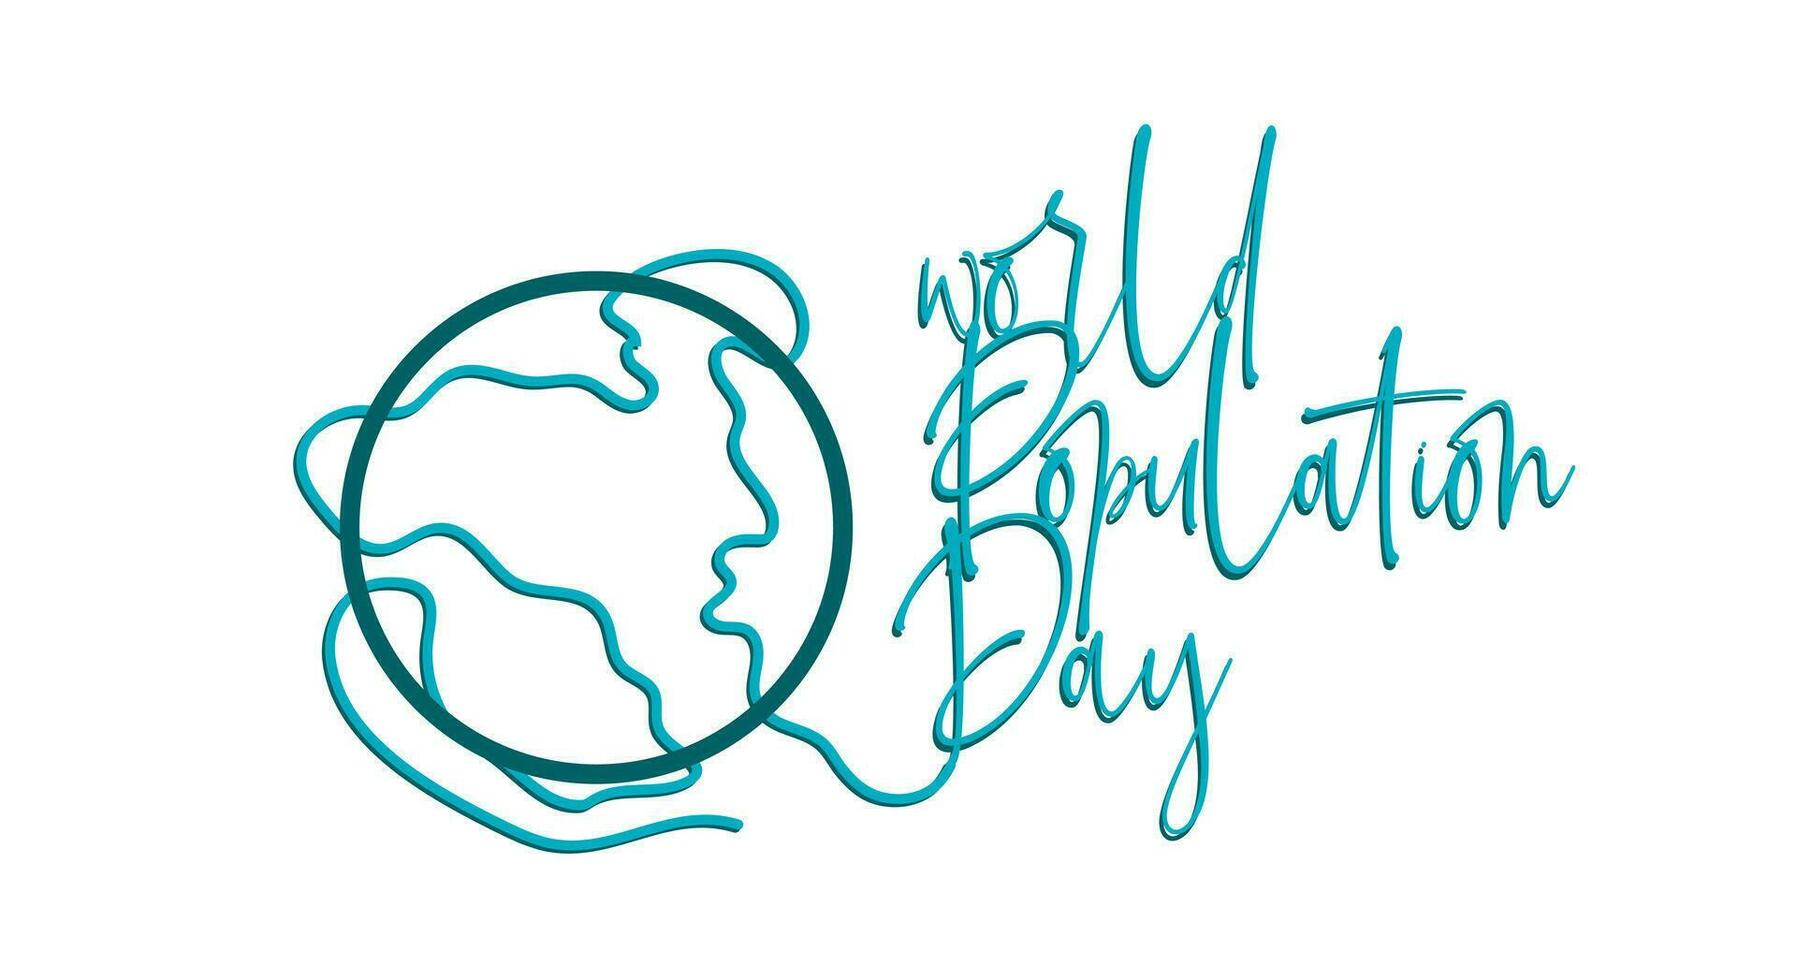 World Population Day. Lettering design and line style map illustration vector